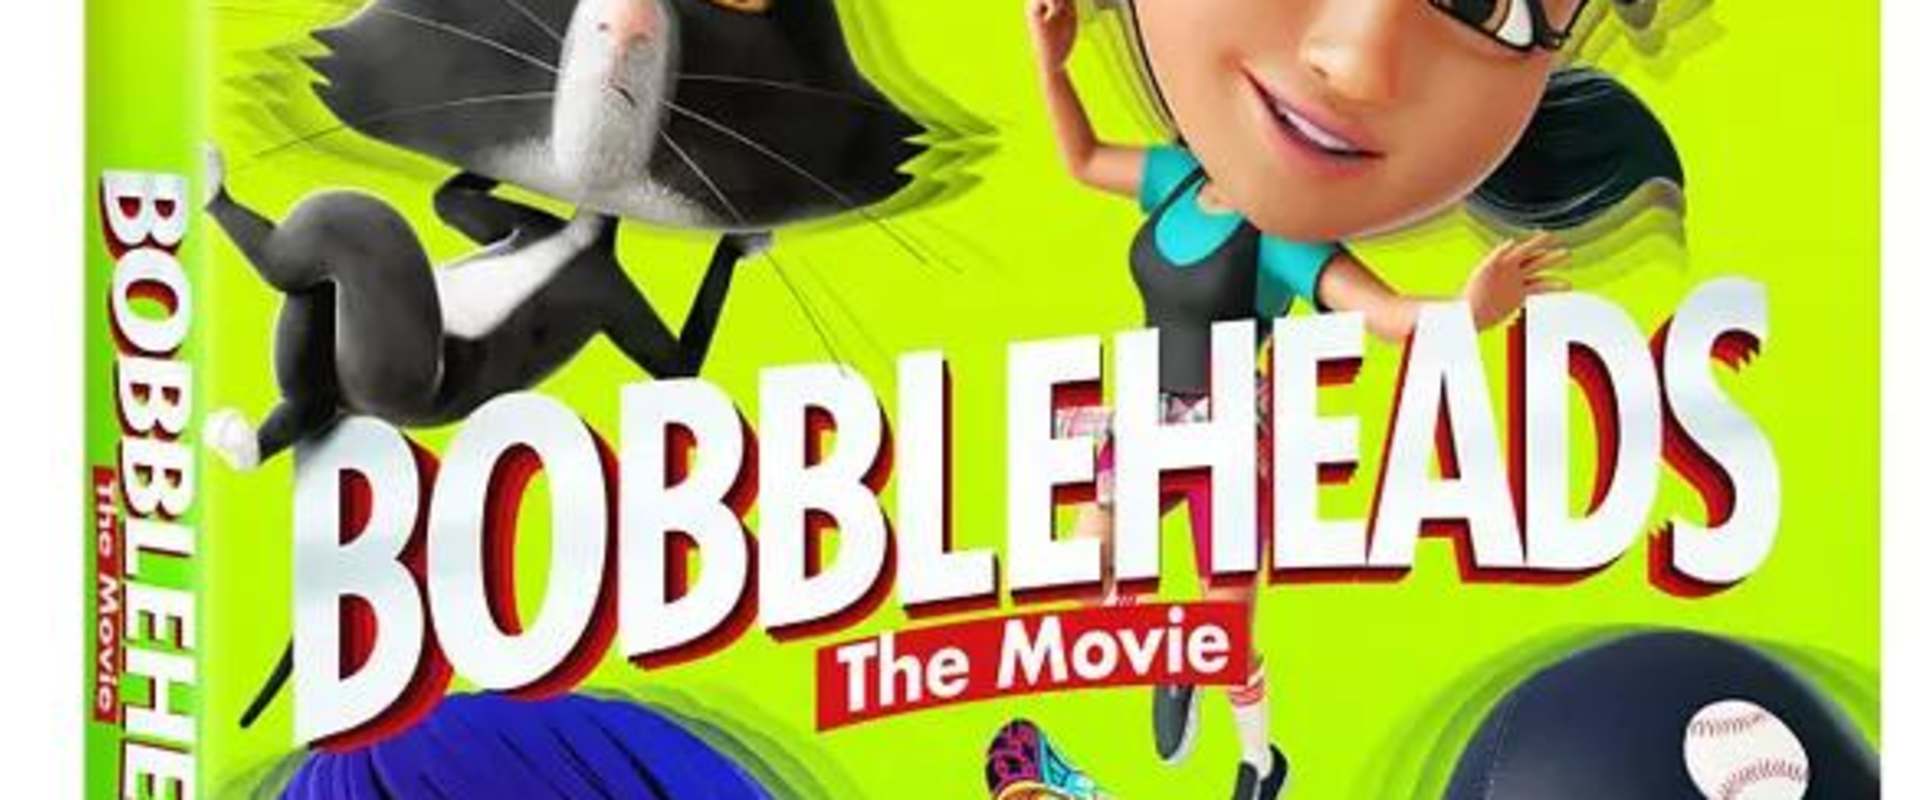 Bobbleheads: The Movie background 2